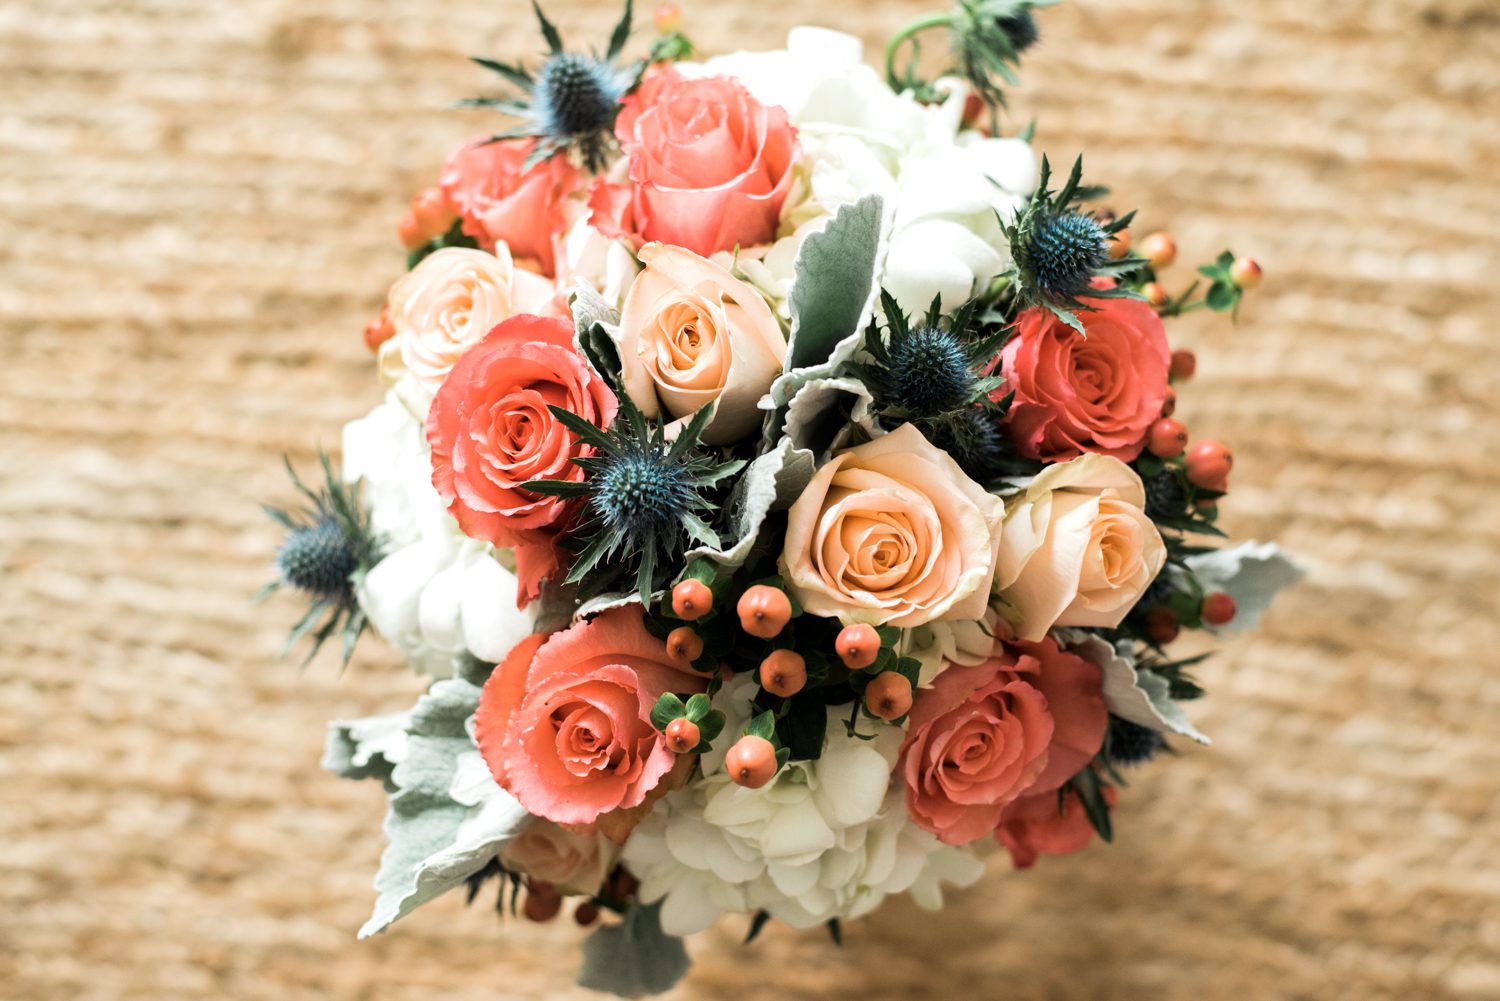 A beautiful bouquet of peach roses and thistle on a rug, perfect for a romantic Florida Keys wedding at the Postcard Inn.